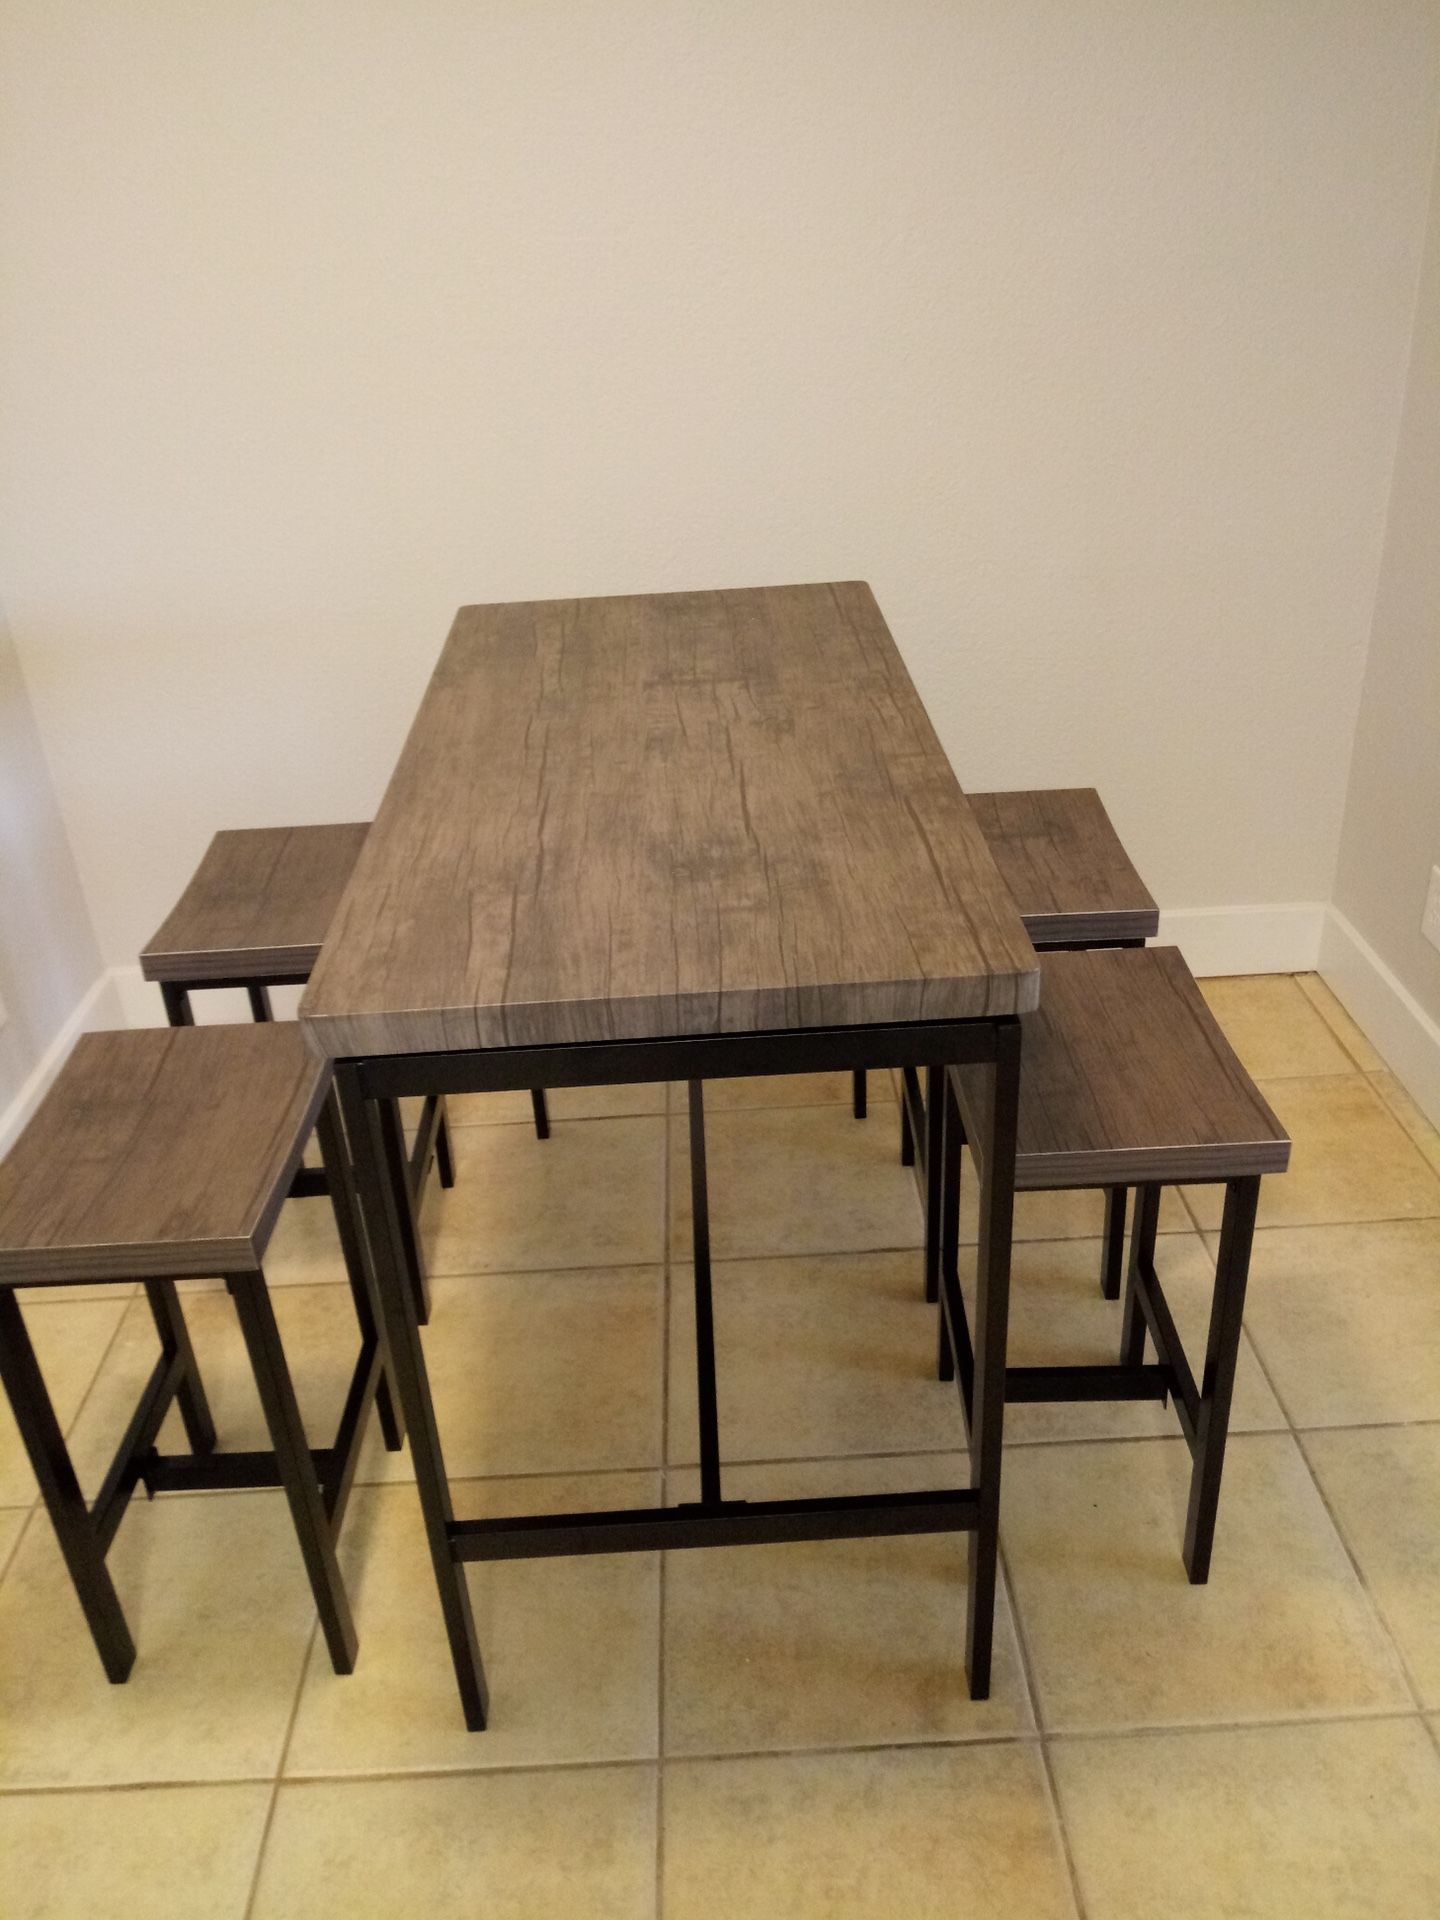 New dining table set with chairs